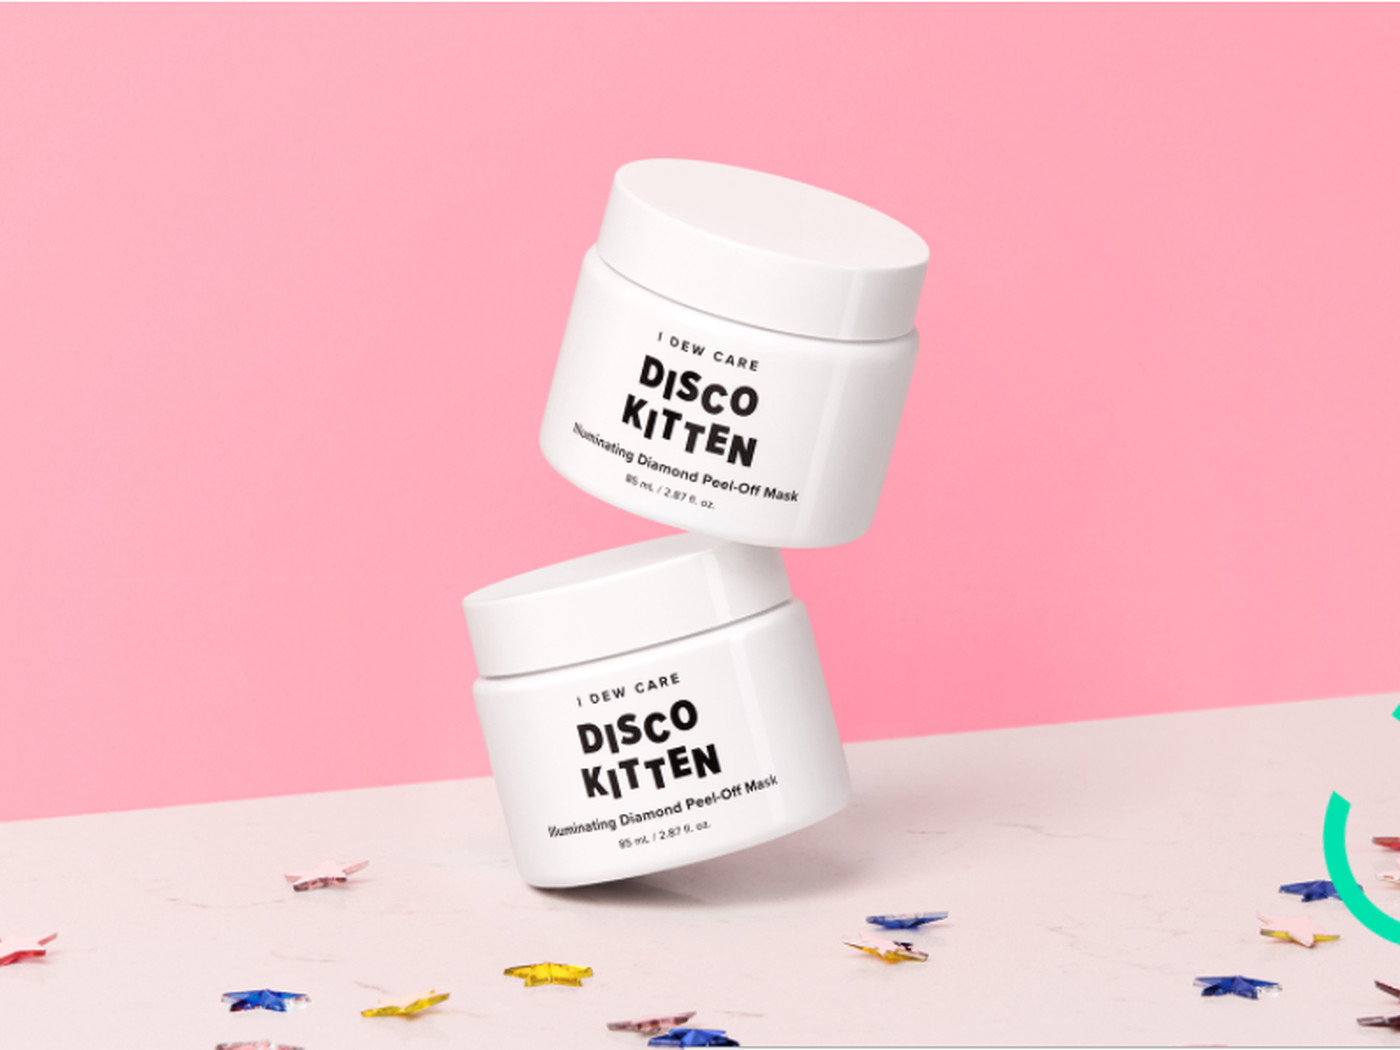 Ulta Can't Keep This New 'Disco Kitten' Mask in - Racked